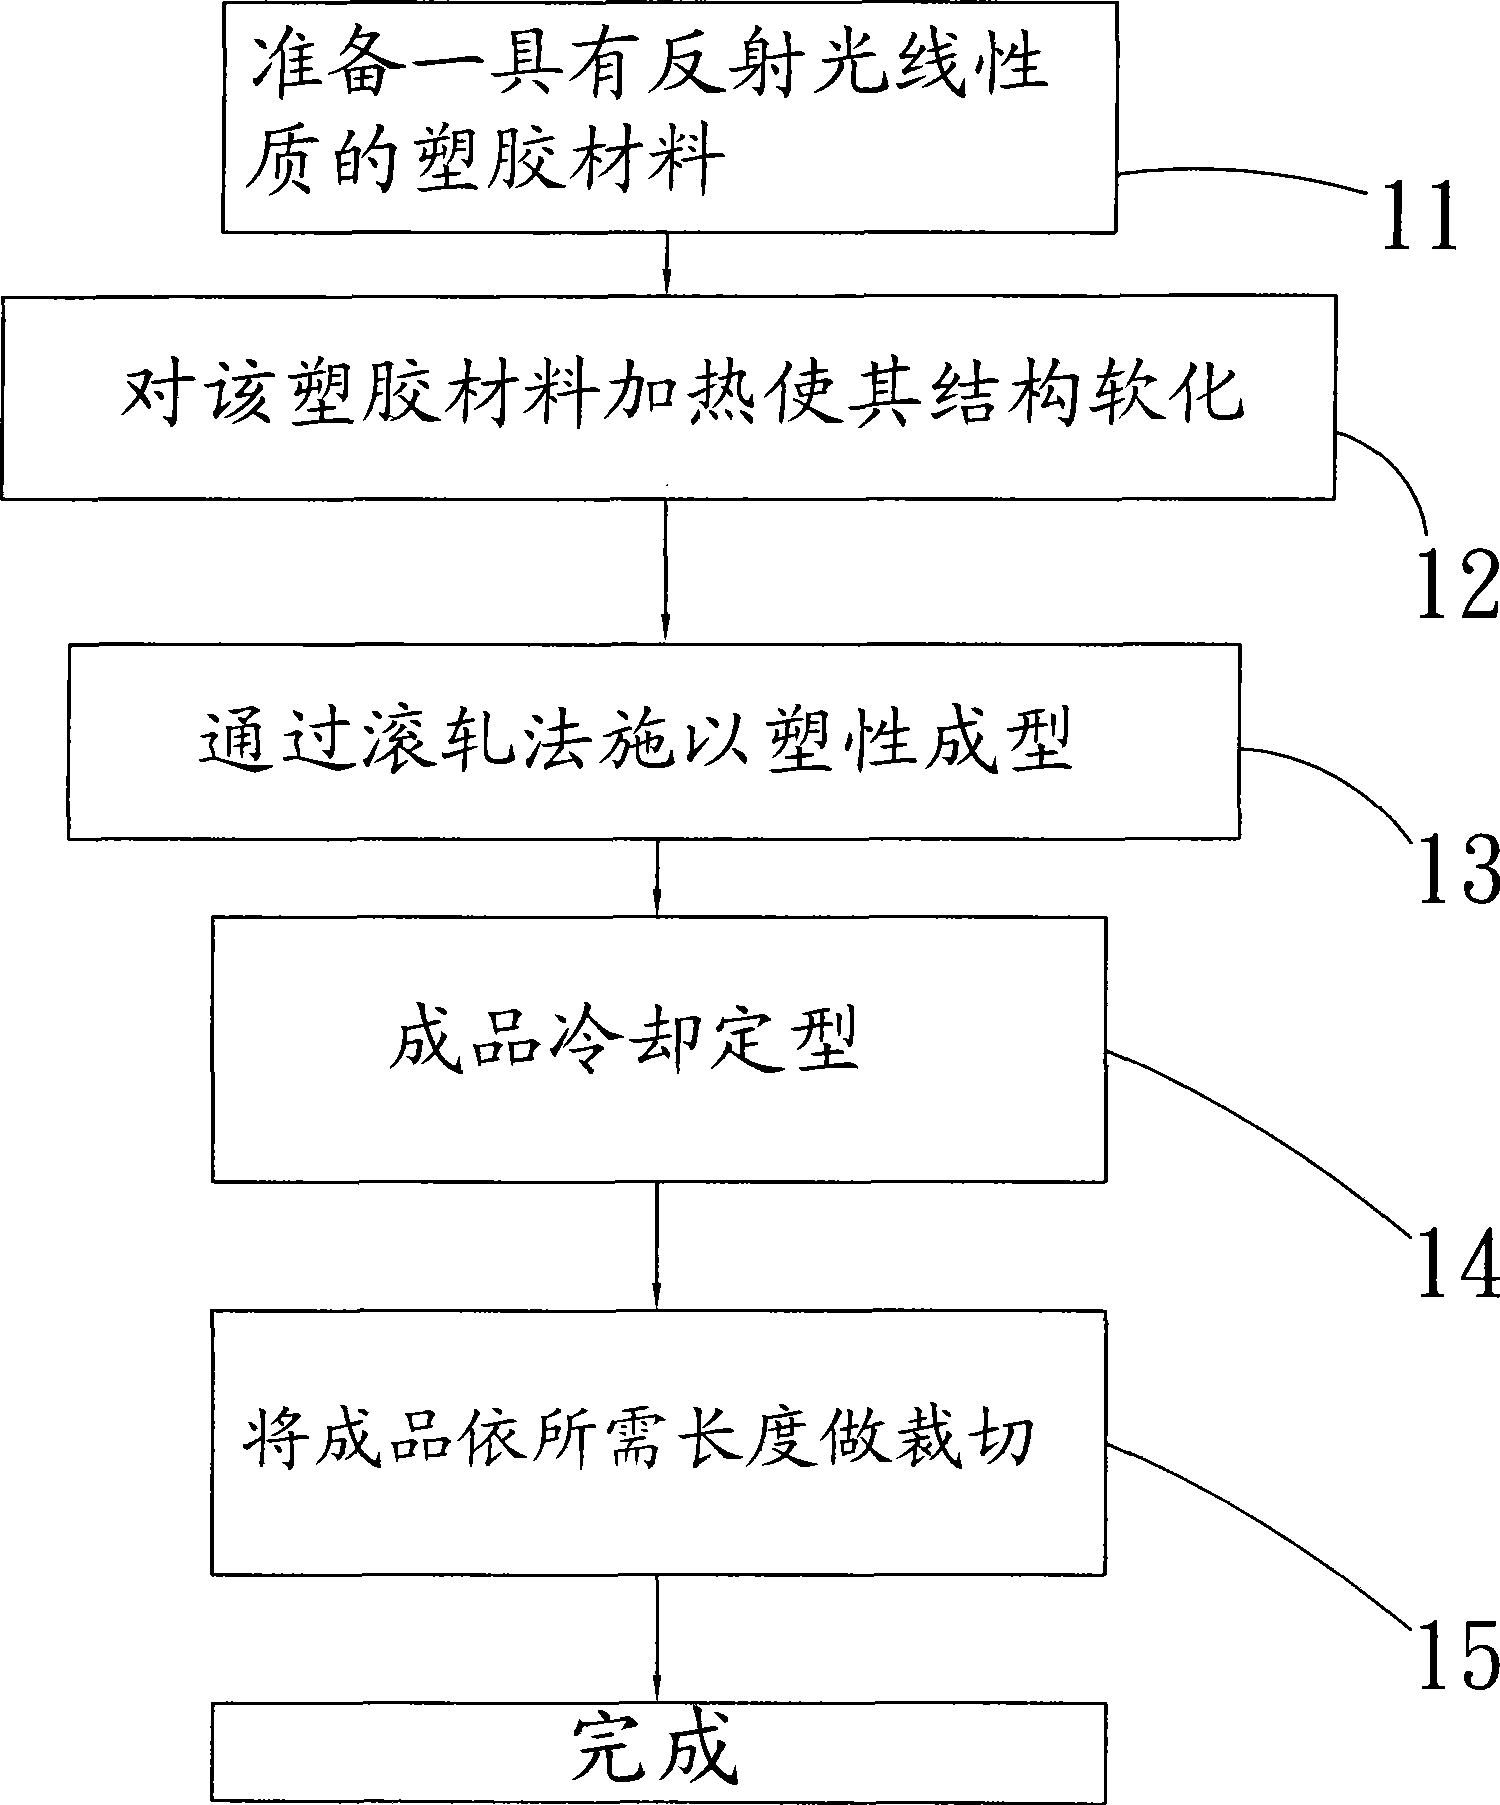 Method for producing reflection sheet lampshade